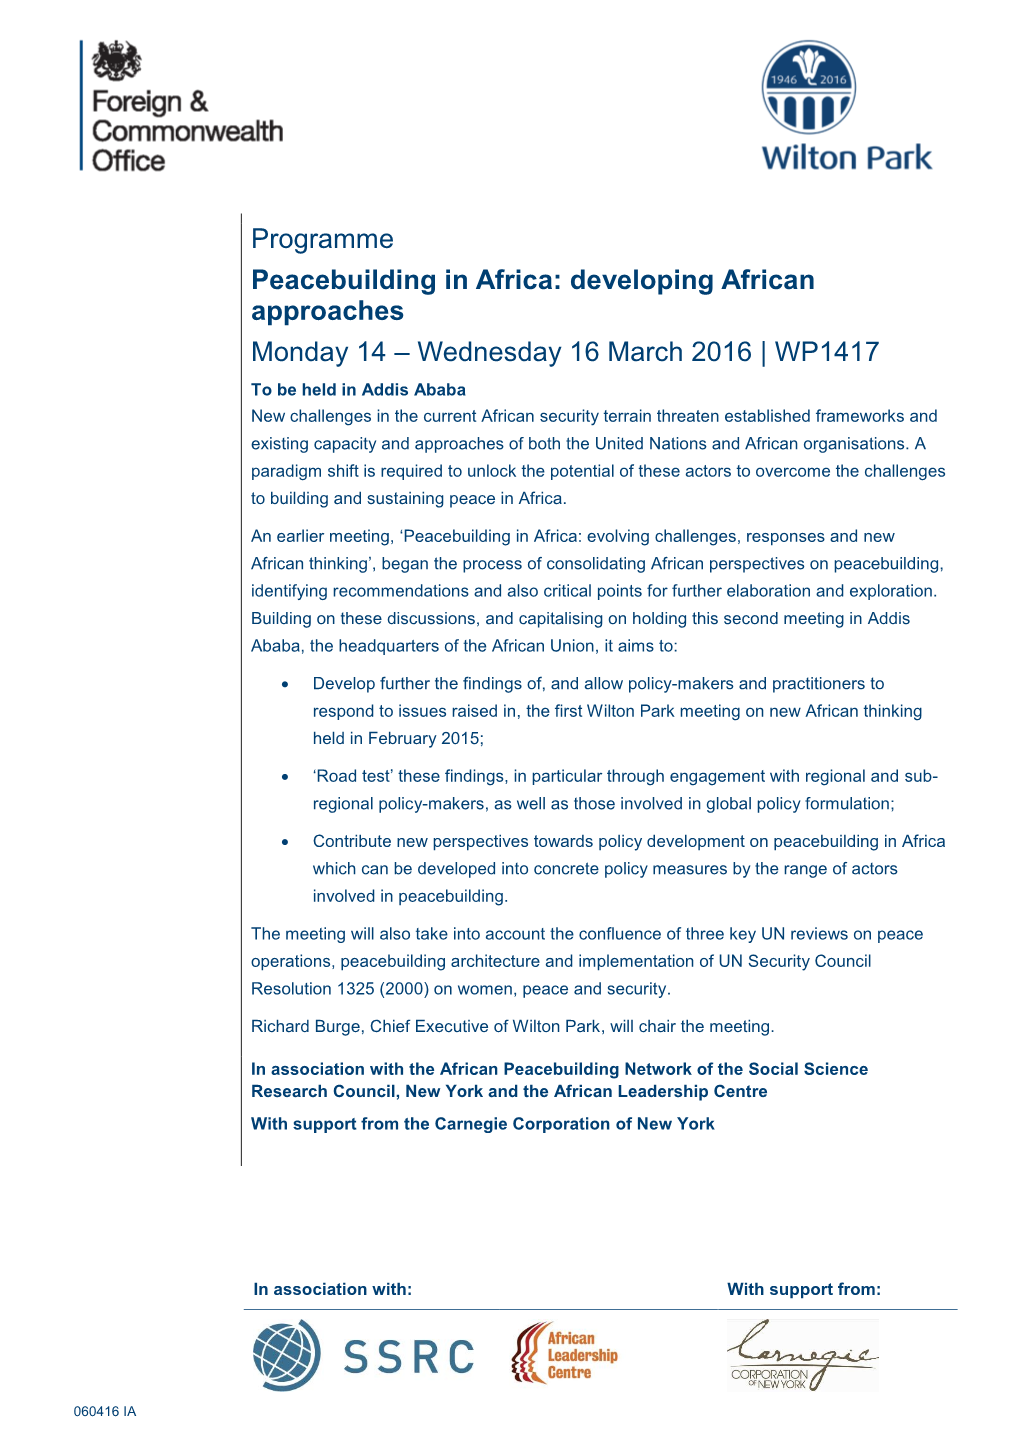 Wilton Park Meeting on New African Thinking Held in February 2015;